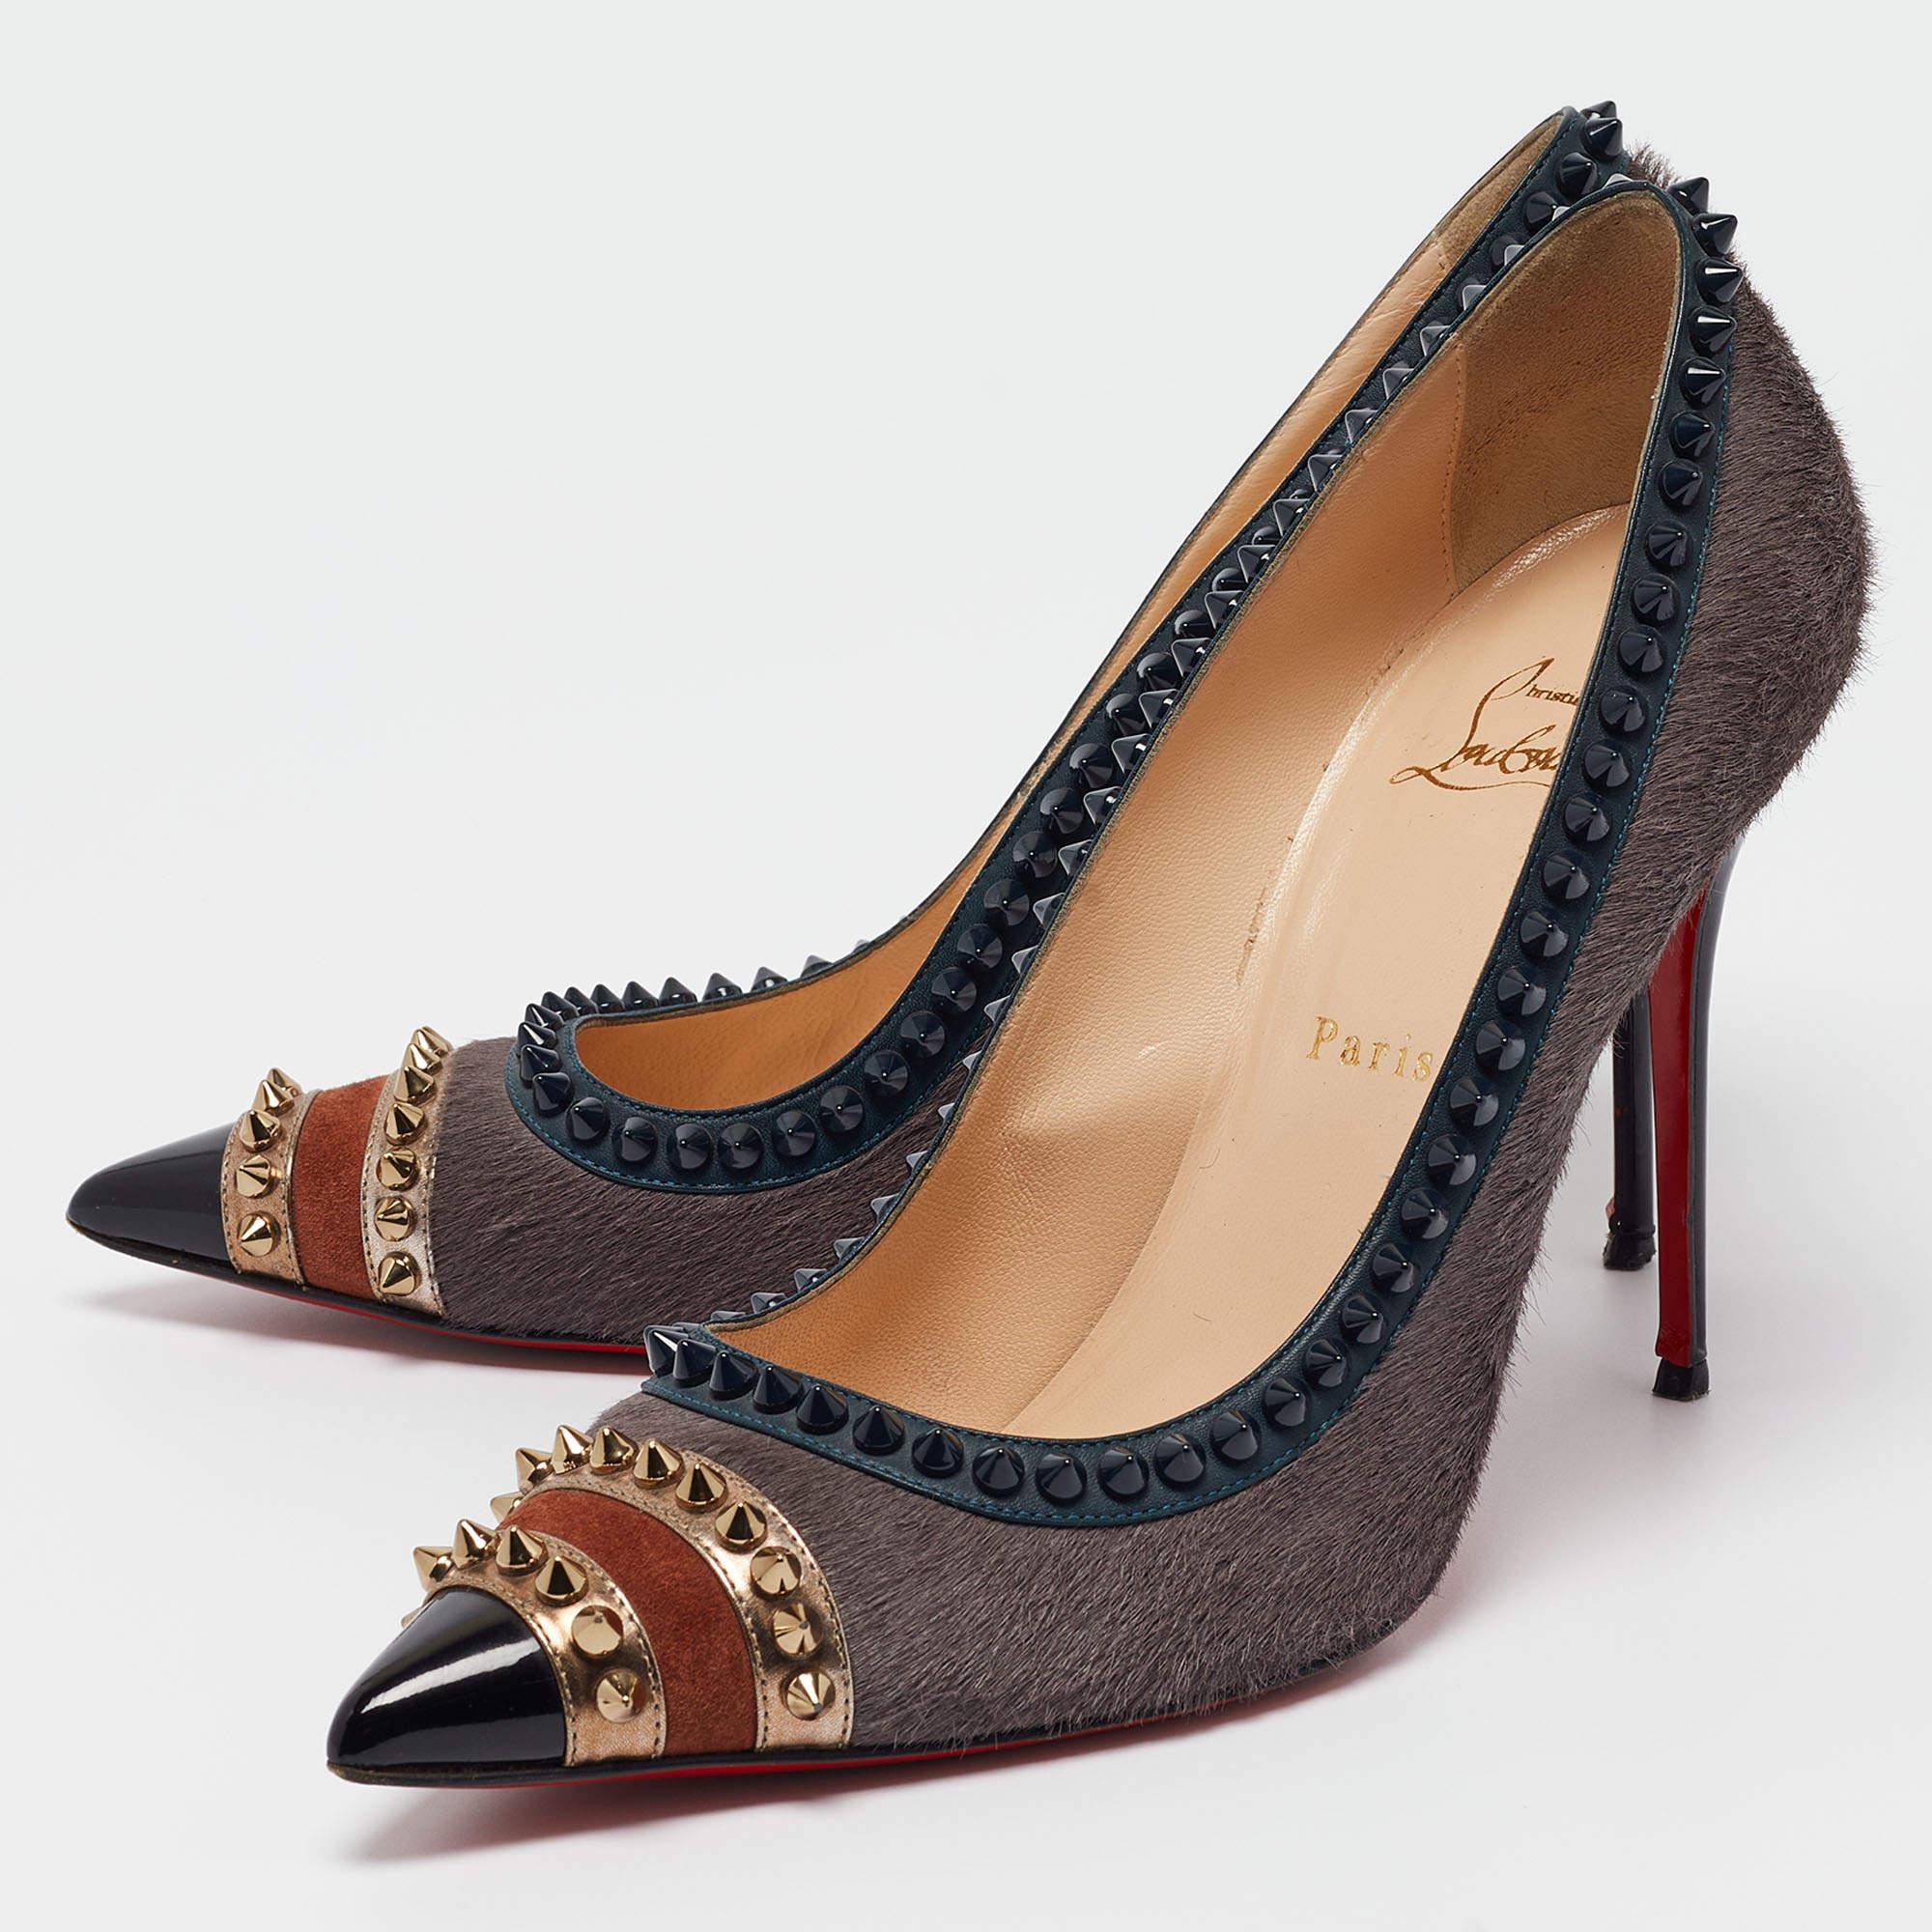 Christian Louboutin Multicolor Calf Hair and Leather Malabar Hill Spiked Pointed For Sale 4